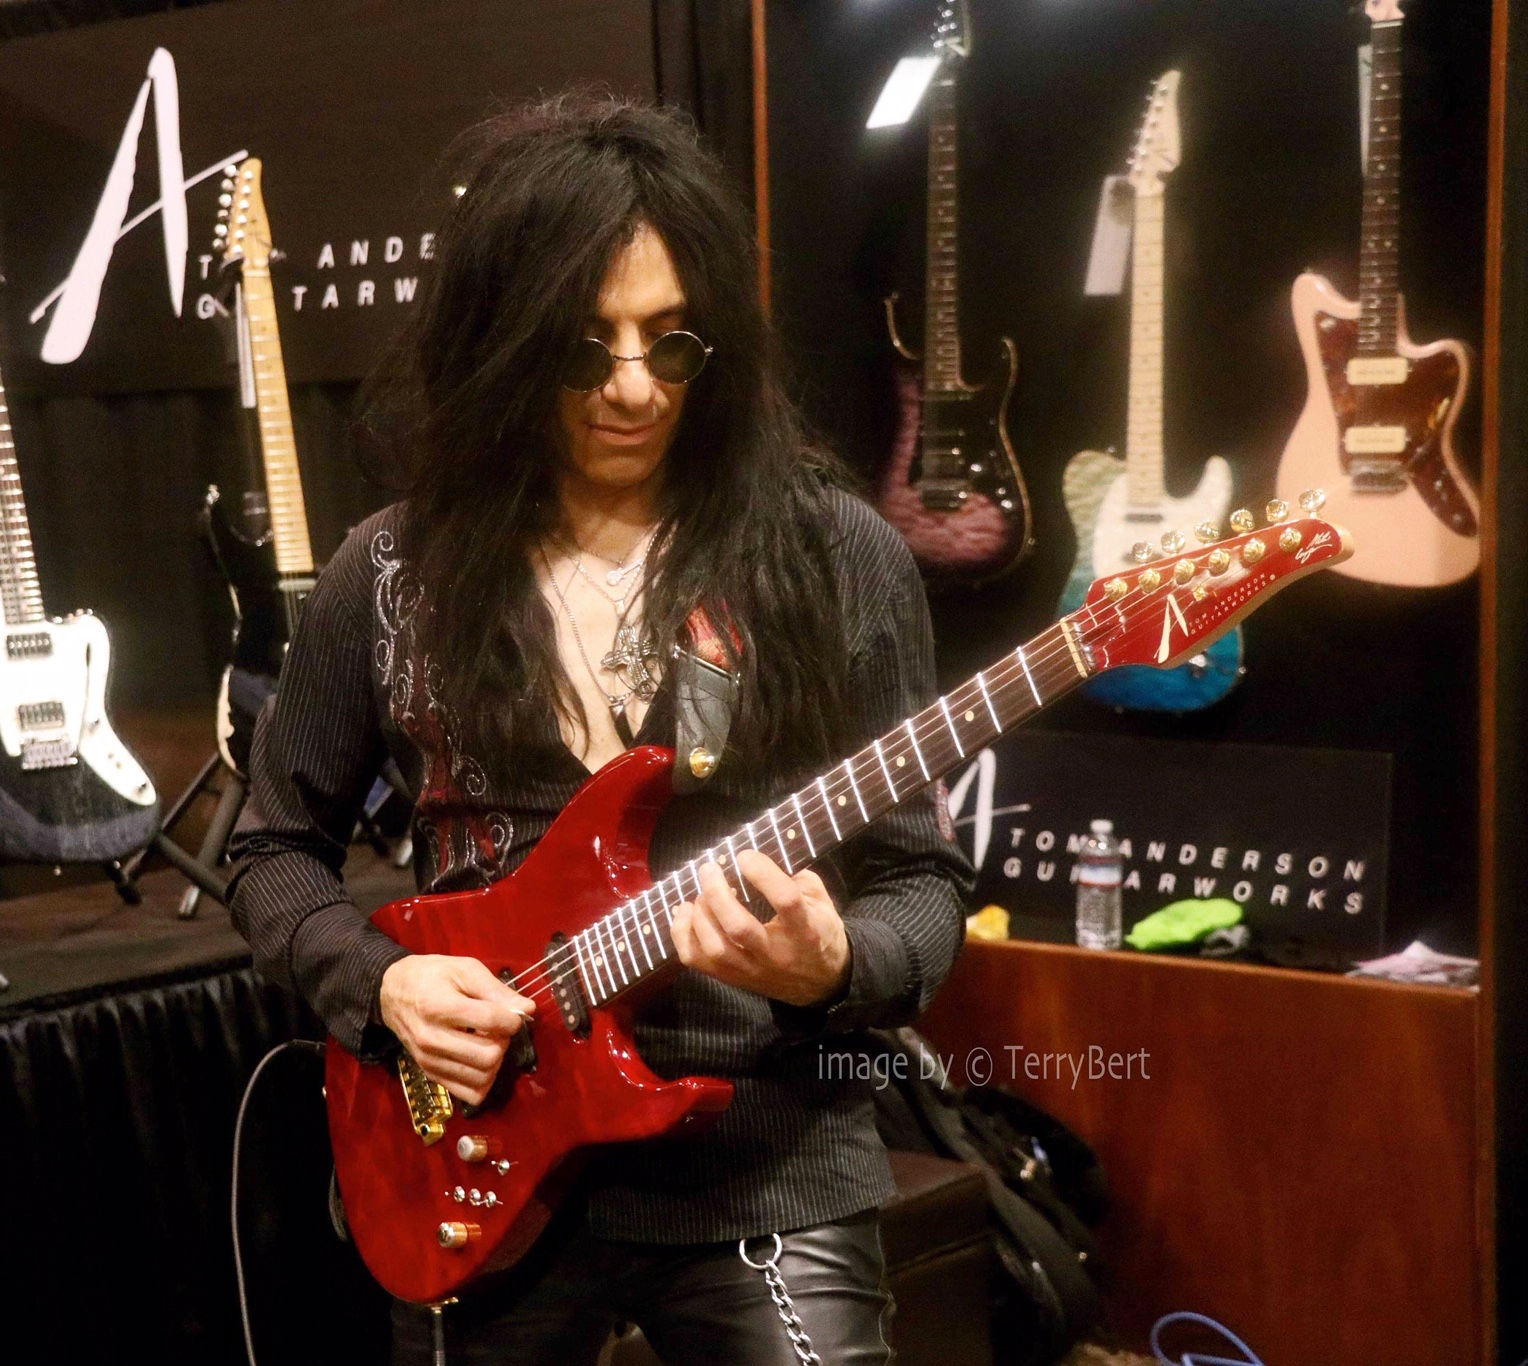 Mike Campese NAMM 2019, Anderson Guitars. By Terry Bert, Pic 2.